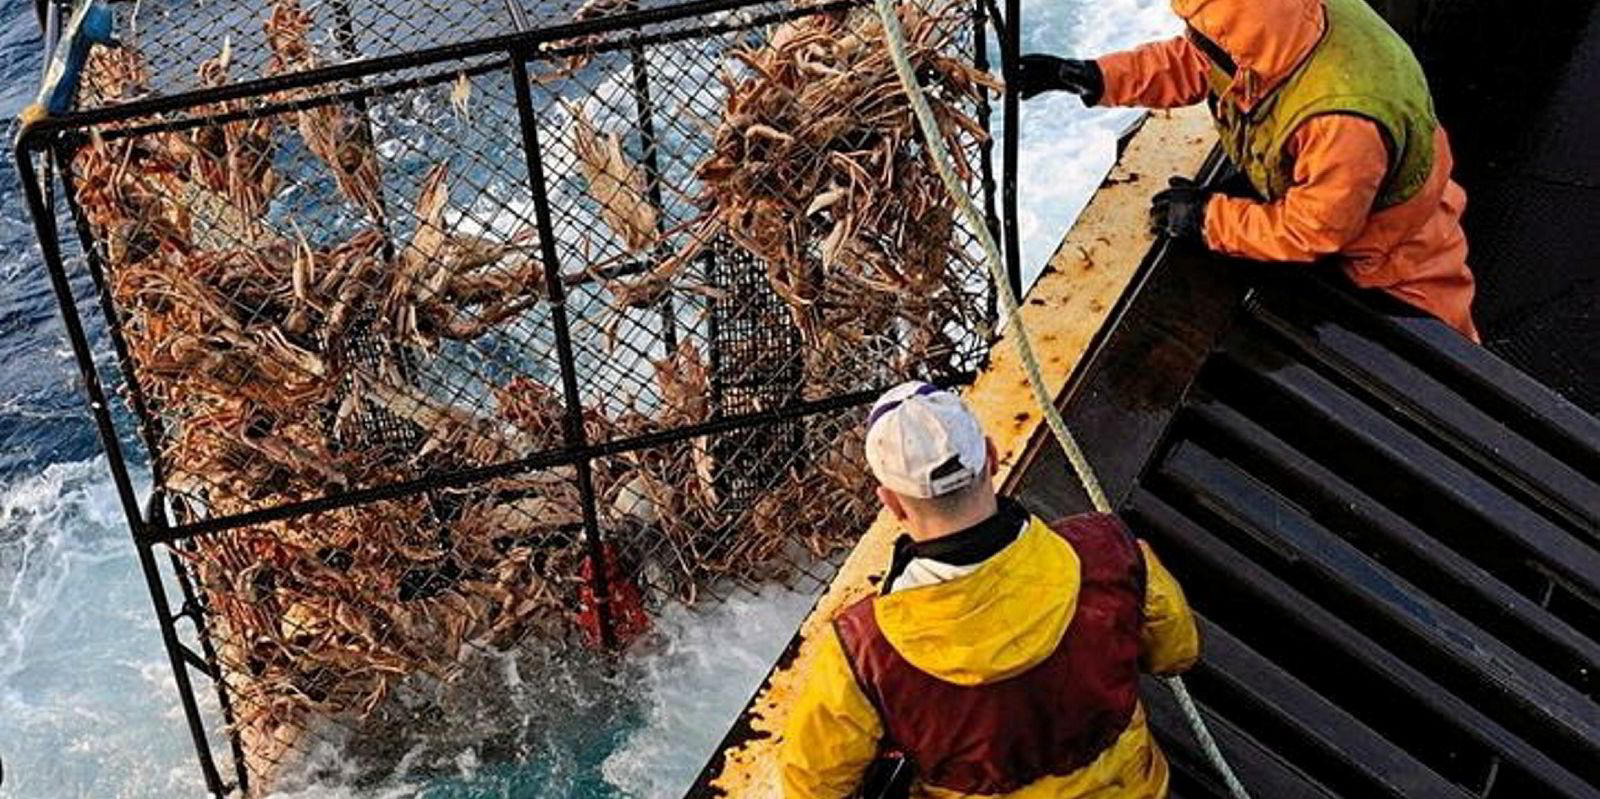 Lots of uncertainty': Significant Alaska snow crab harvests could